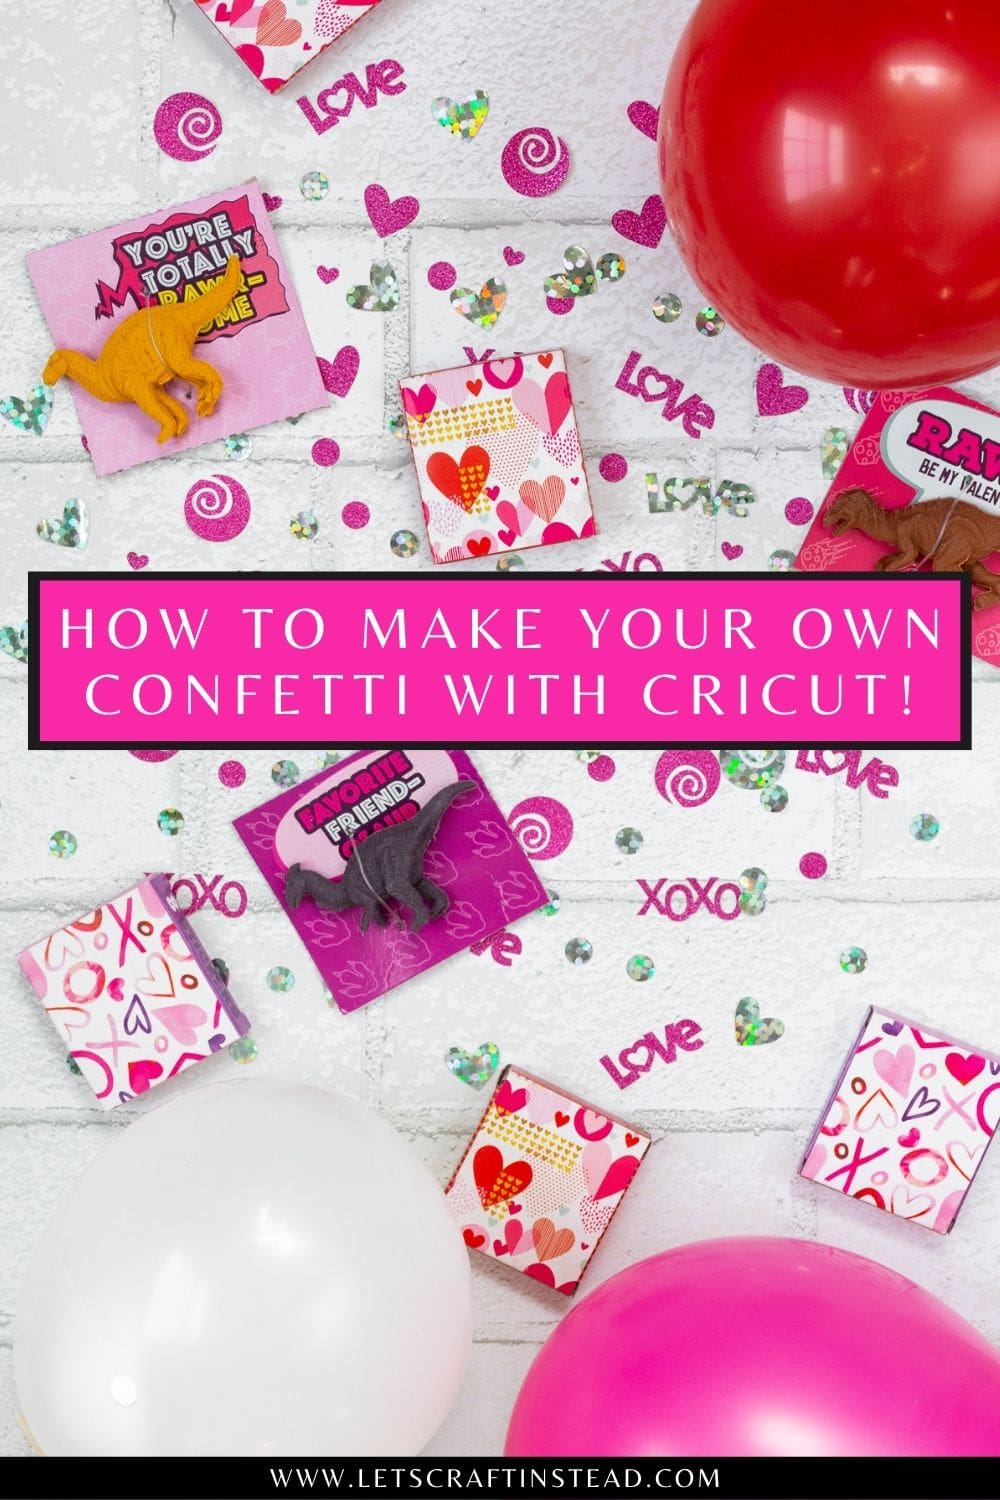 image of confetti and valentines with text that says how to make your own confetti with cricut